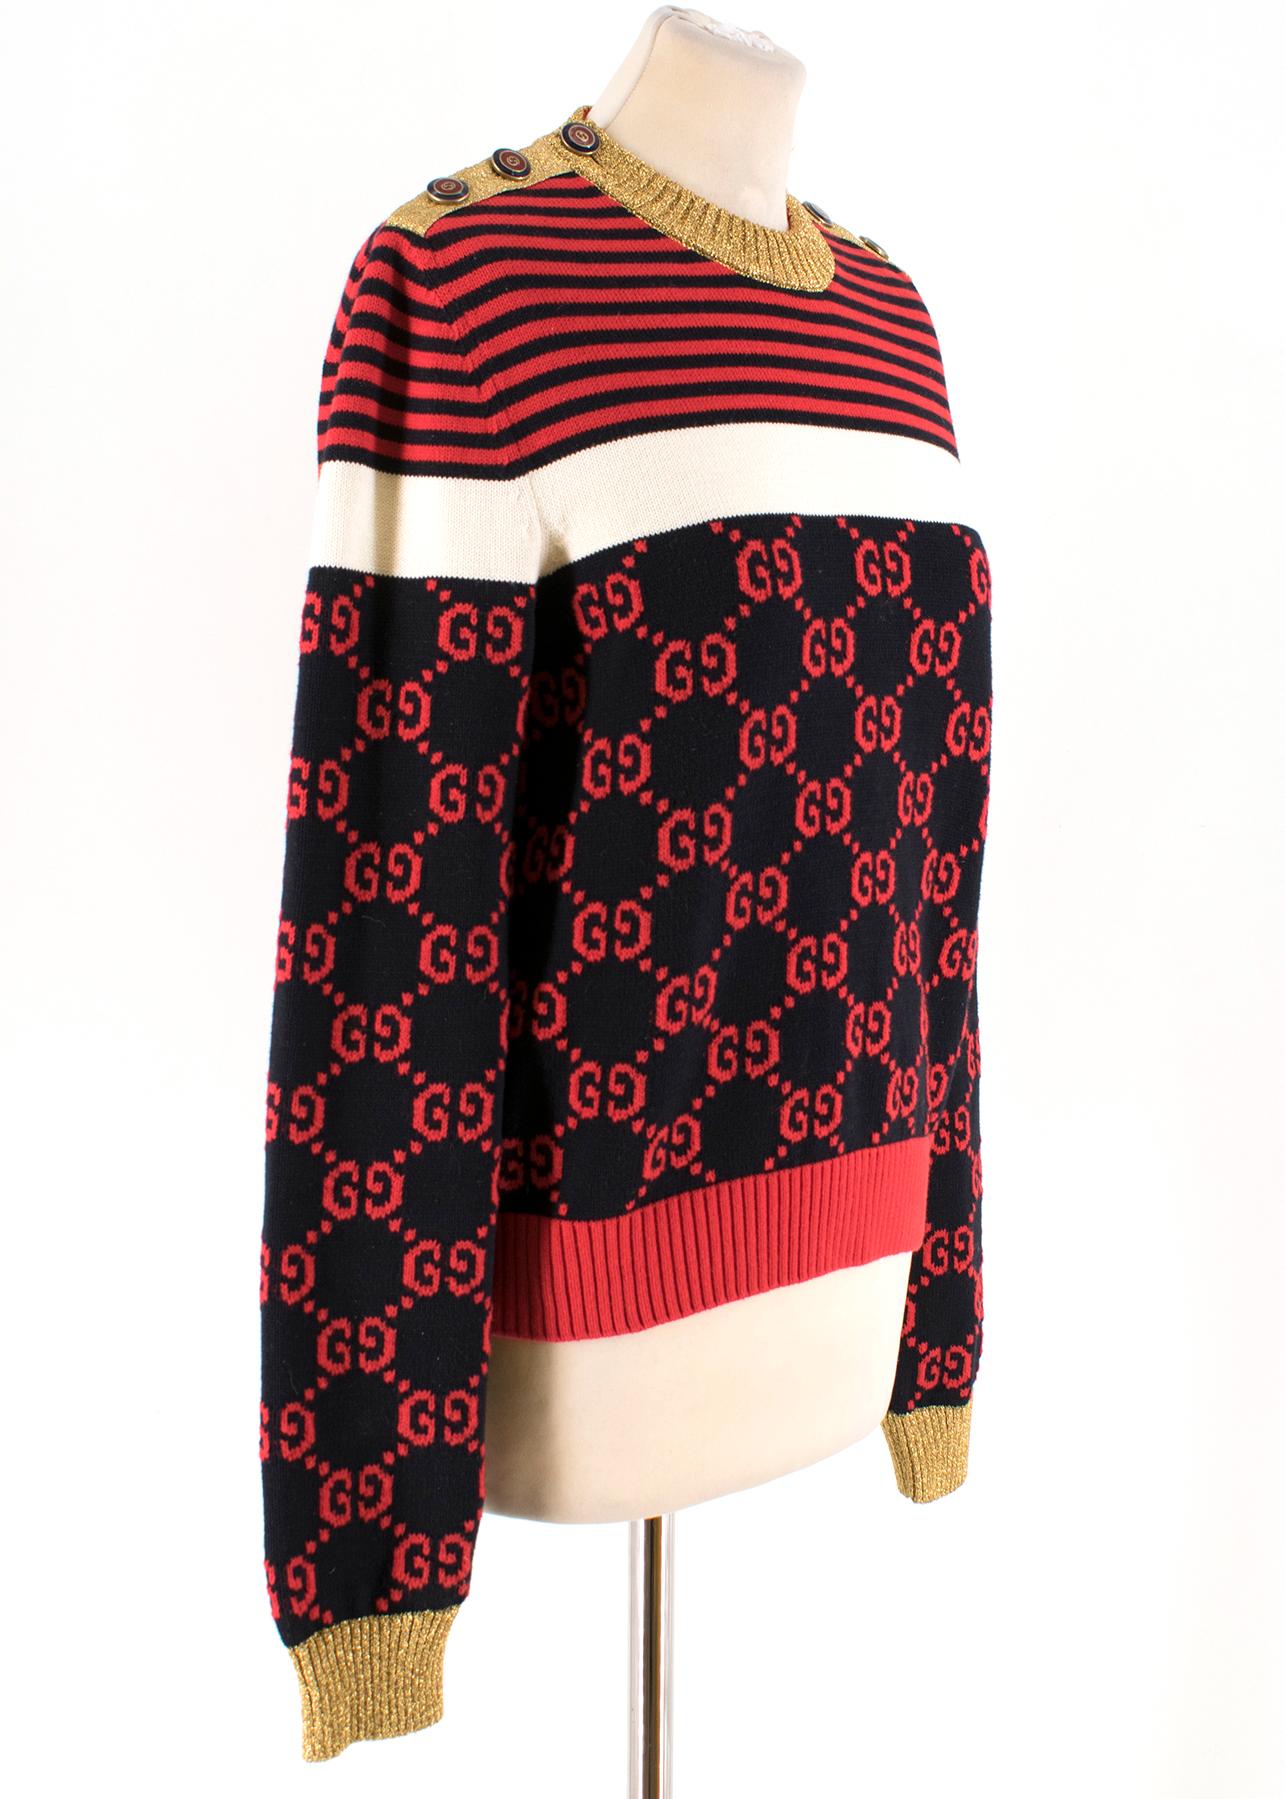 Gucci Metallic Trimmed Logo Intarsia Cotton Sweater

-Red and black monogram jumper
-Striped detailing at the bust
-Metallic shoulder, collar and cuffs
-Logo button closure at the shoulder

Please note, these items are pre-owned and may show signs